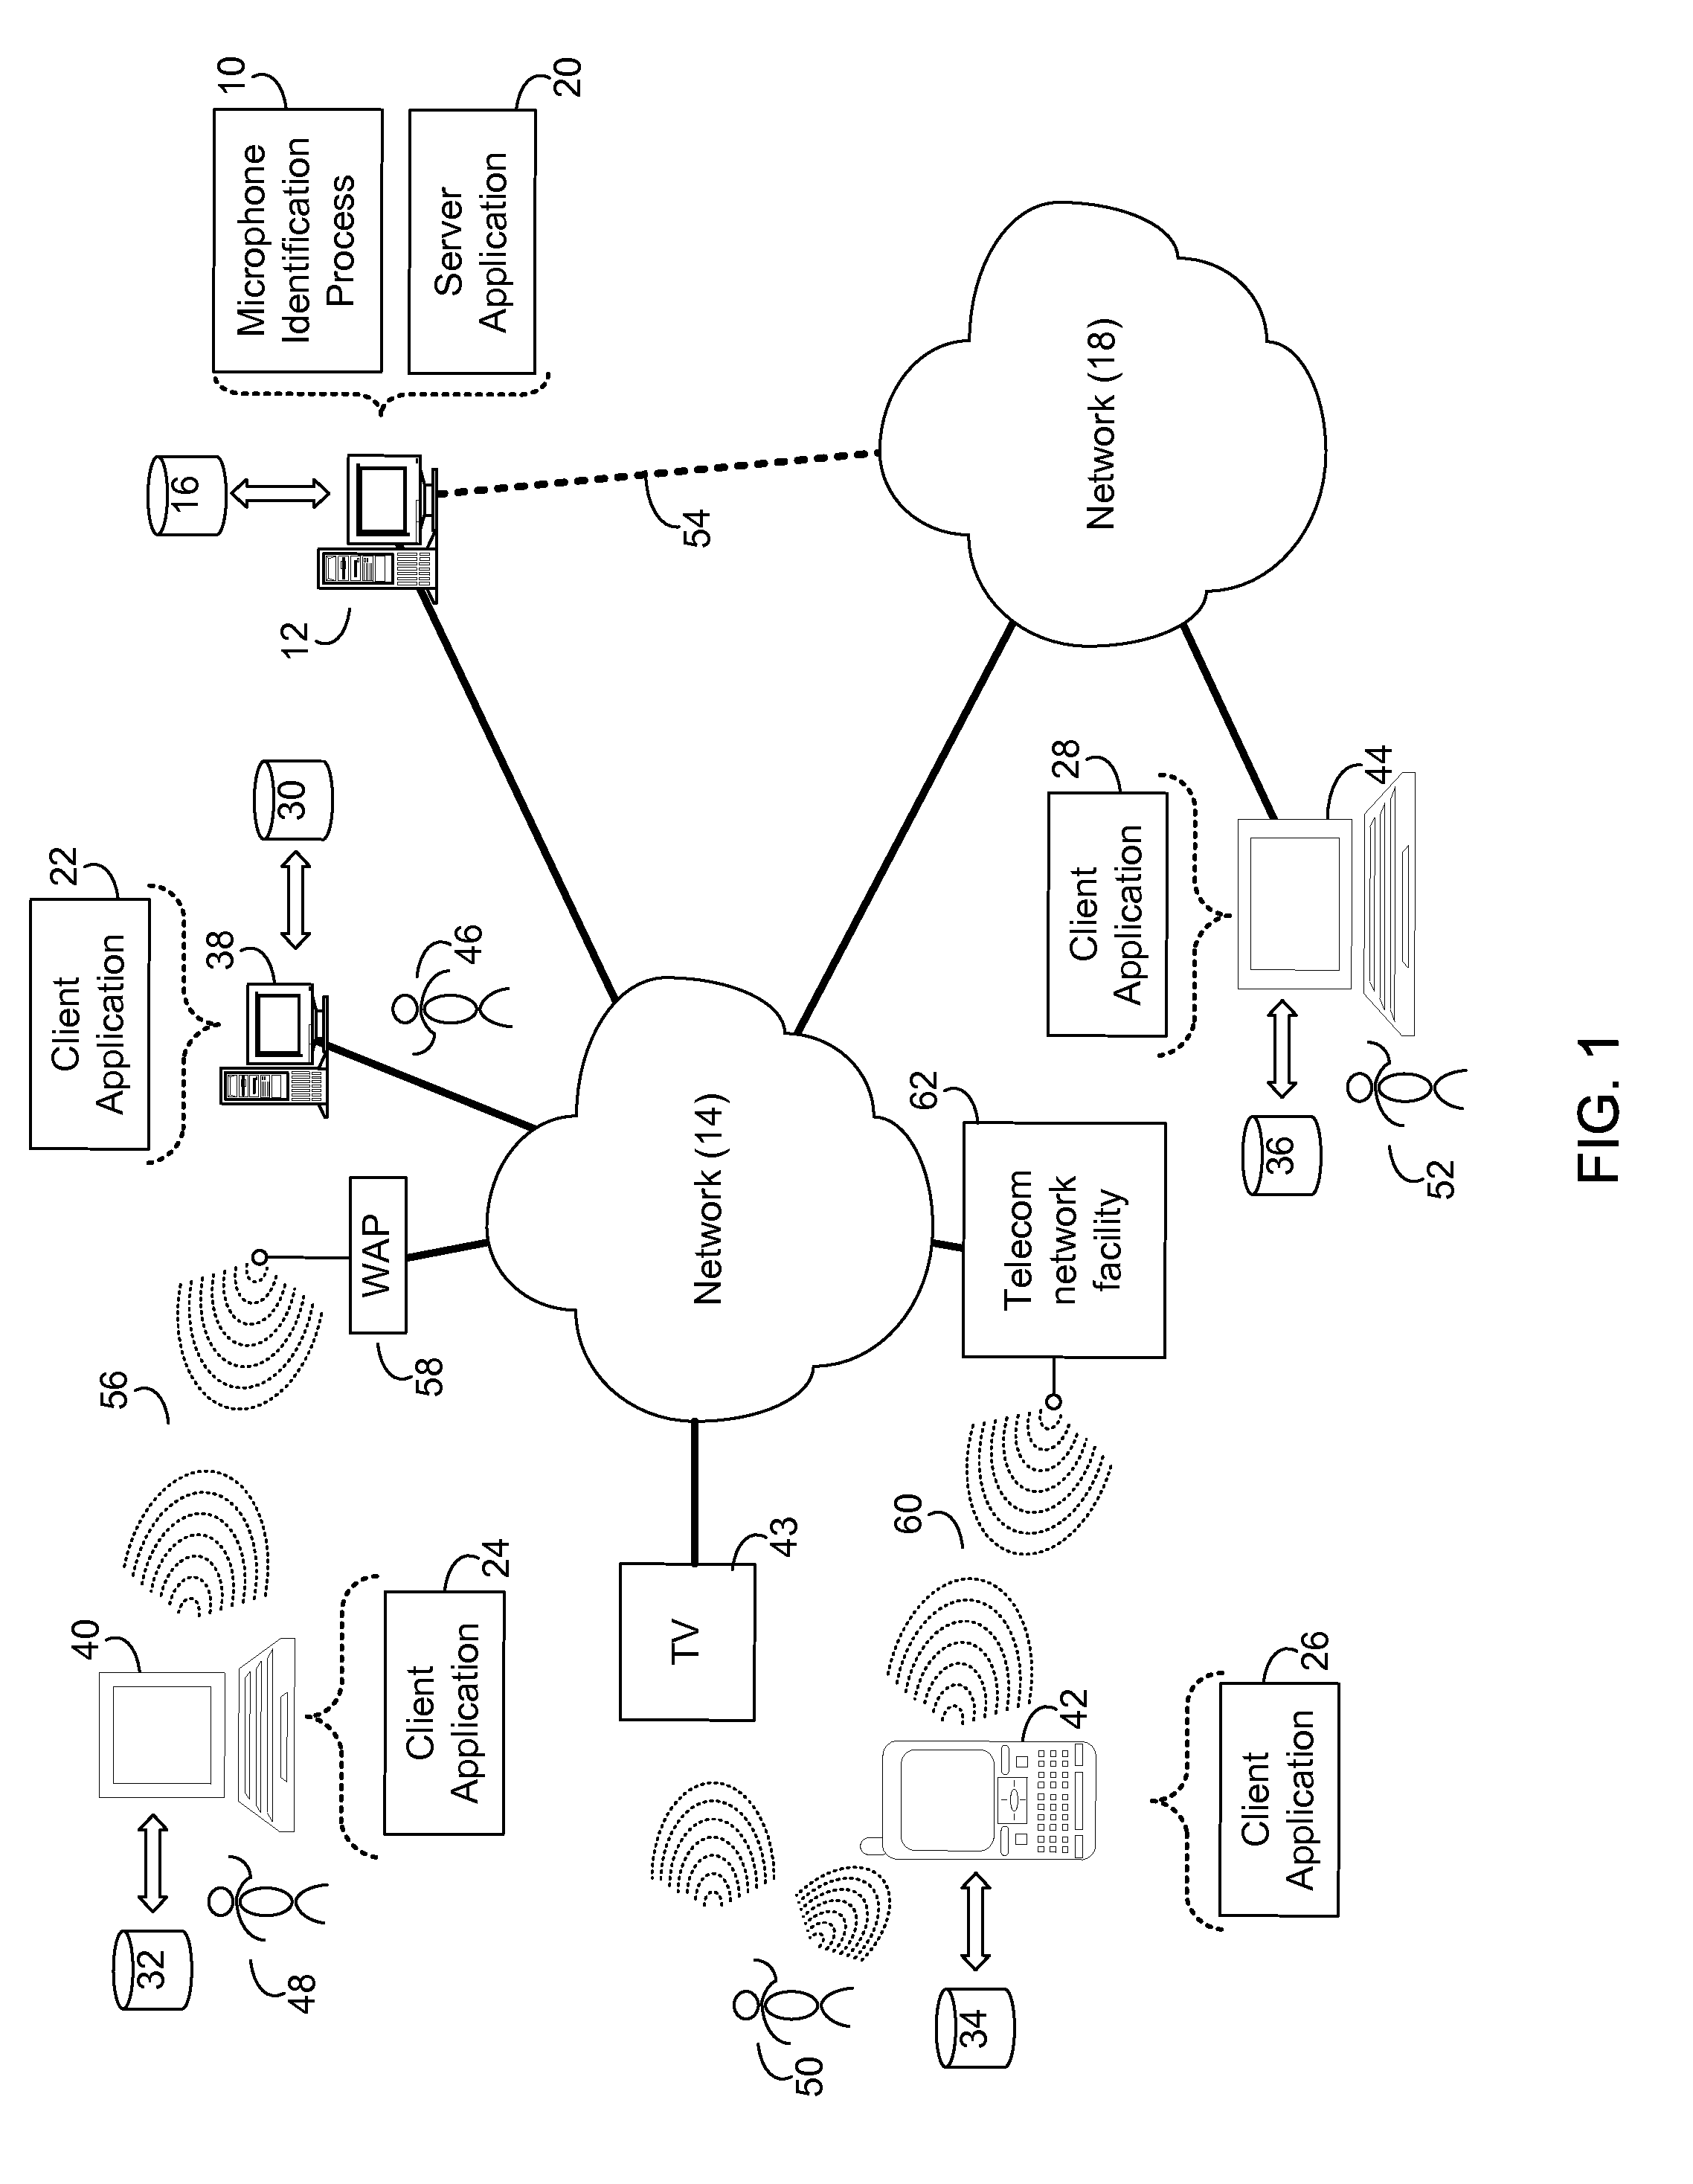 System and method for identifying suboptimal microphone performance